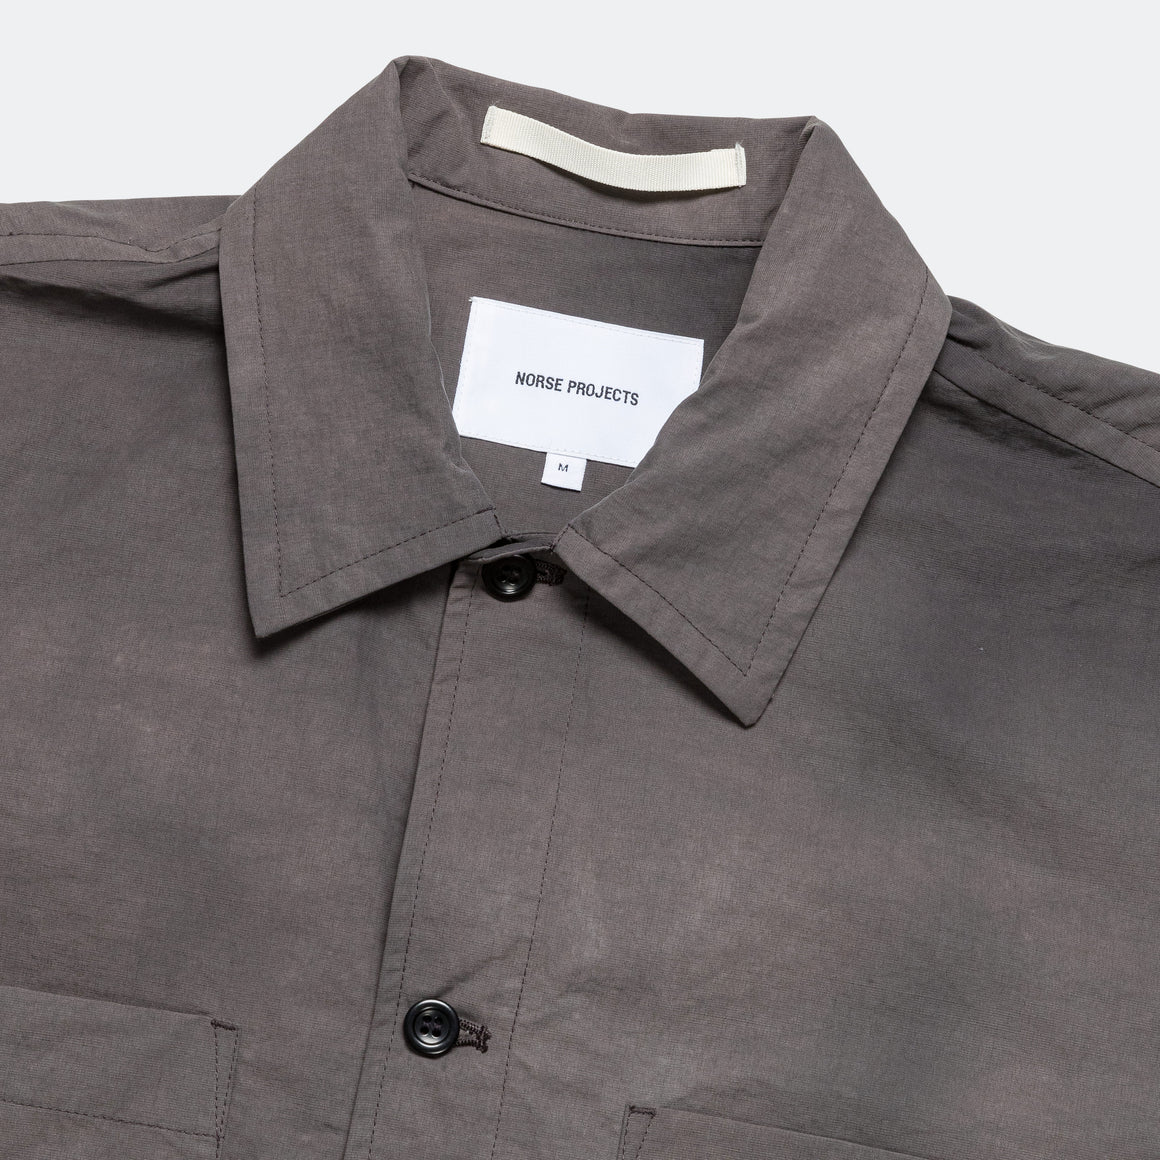 Norse Projects - Ulrik Wave Dye Overshirt - Black - UP THERE